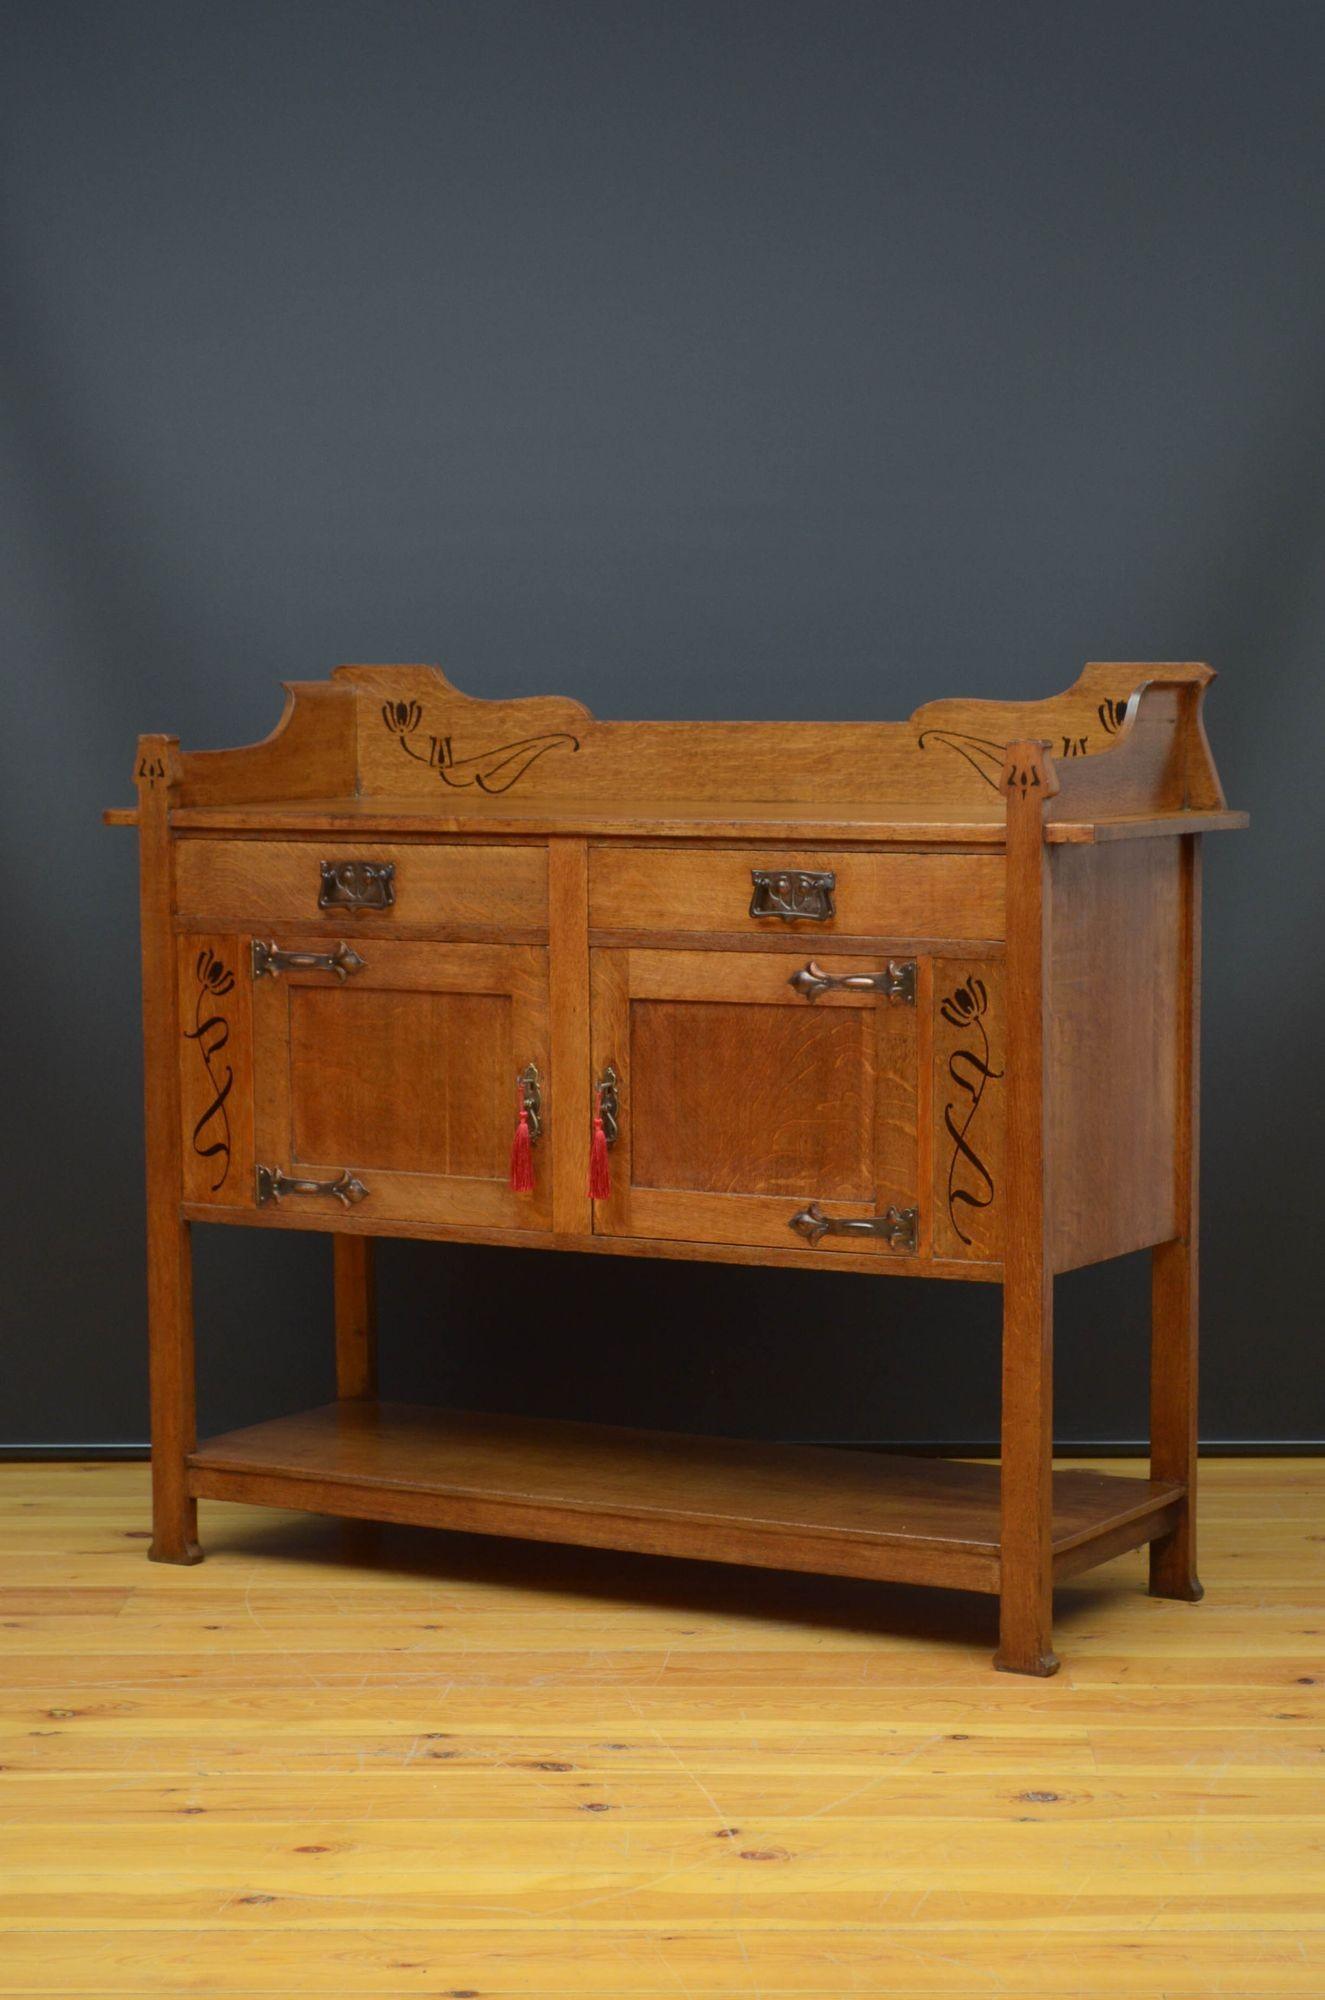 Sn5431 Stylish Arts and Crafts oak sideboard, having shaped and inlaid gallery to the top above two frieze drawers fitted with original handles and two panelled cupboard doors also fitted with original handles, working locks with keys and decorative